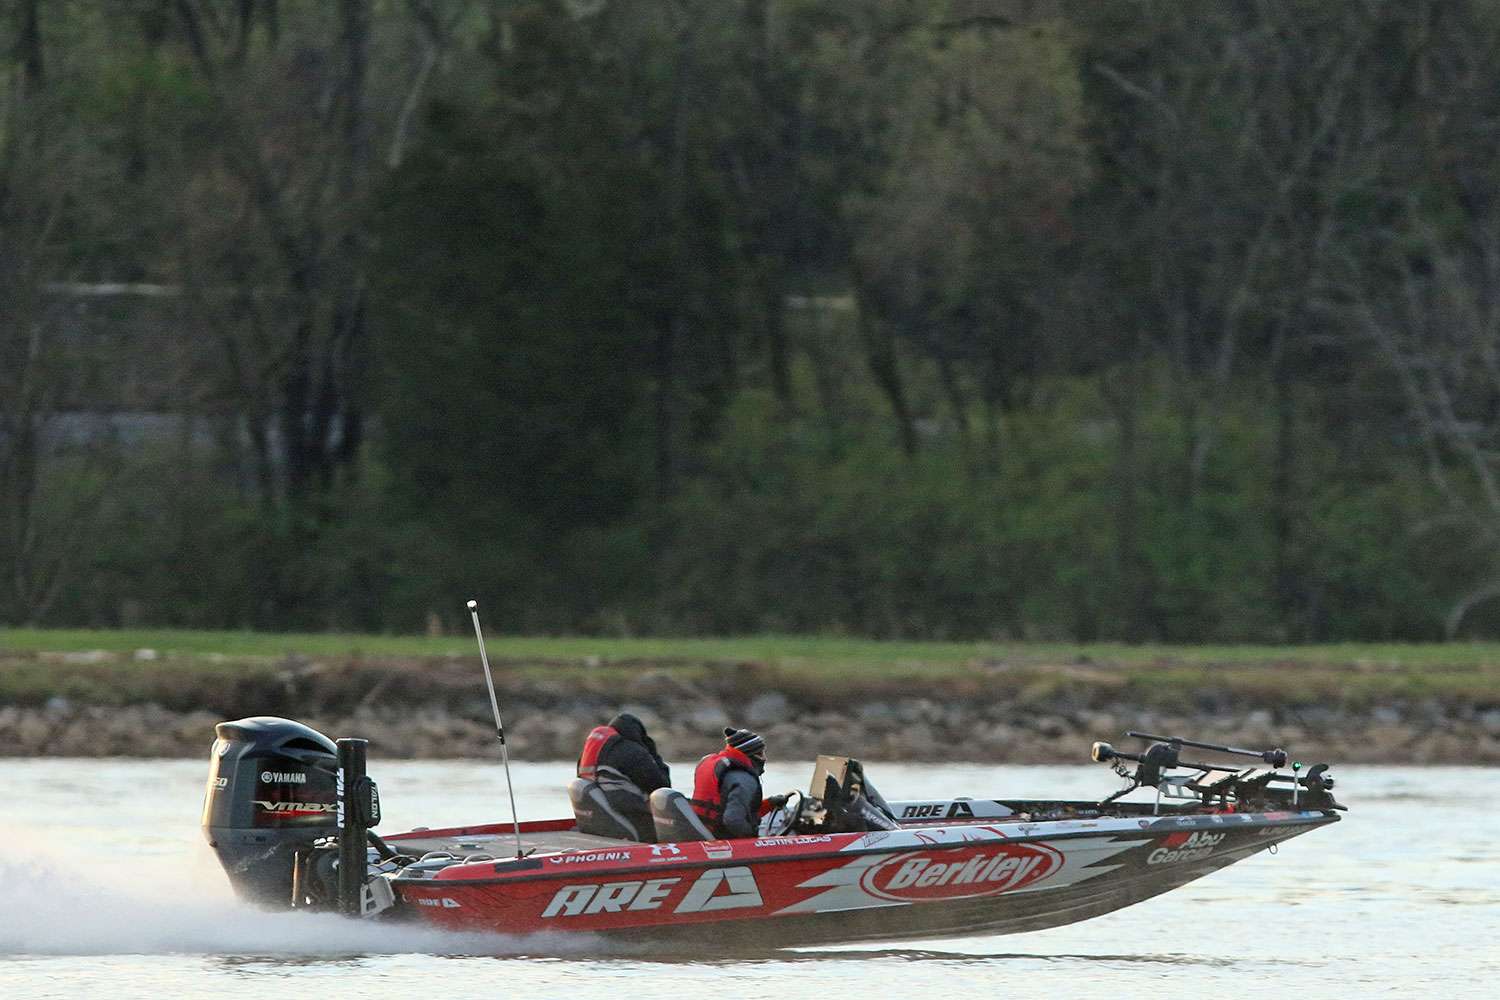 Follow 2018 Toyota Bassmaster Angler of the Year Justin Lucas as he works through a tough morning at the 2019 GEICO Bassmaster Classic presented by DICK'S Sporting Goods.